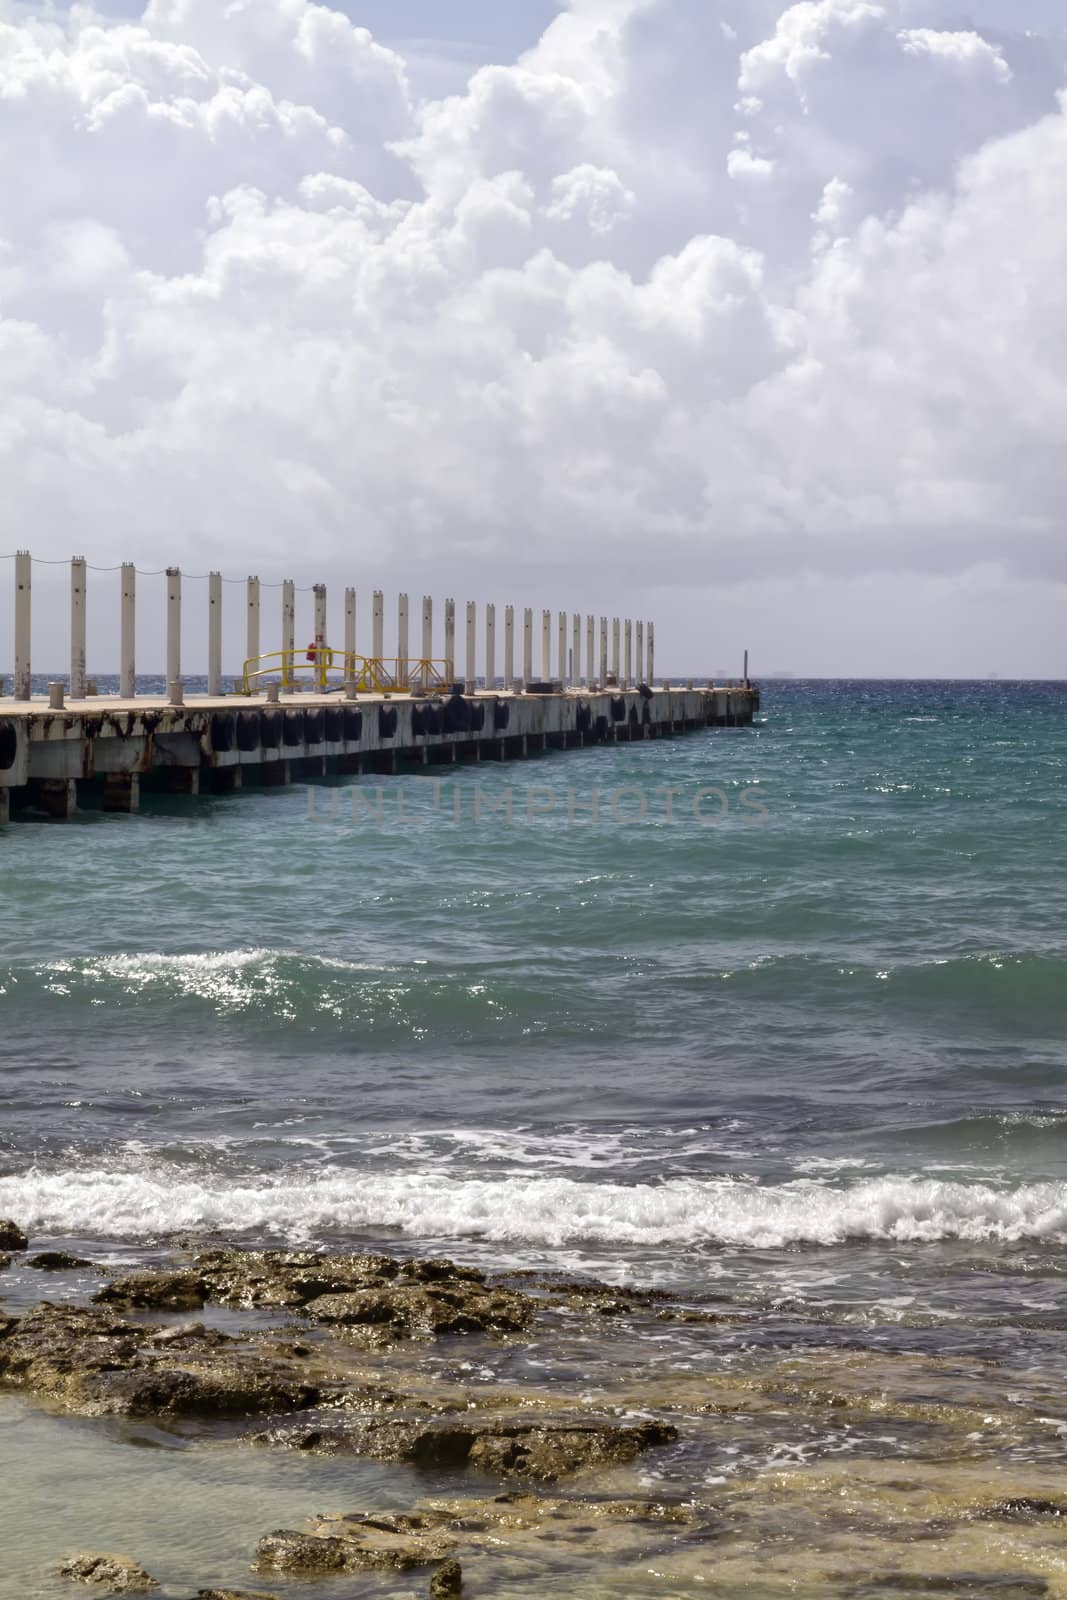 A long pier going out in the tropical ocean